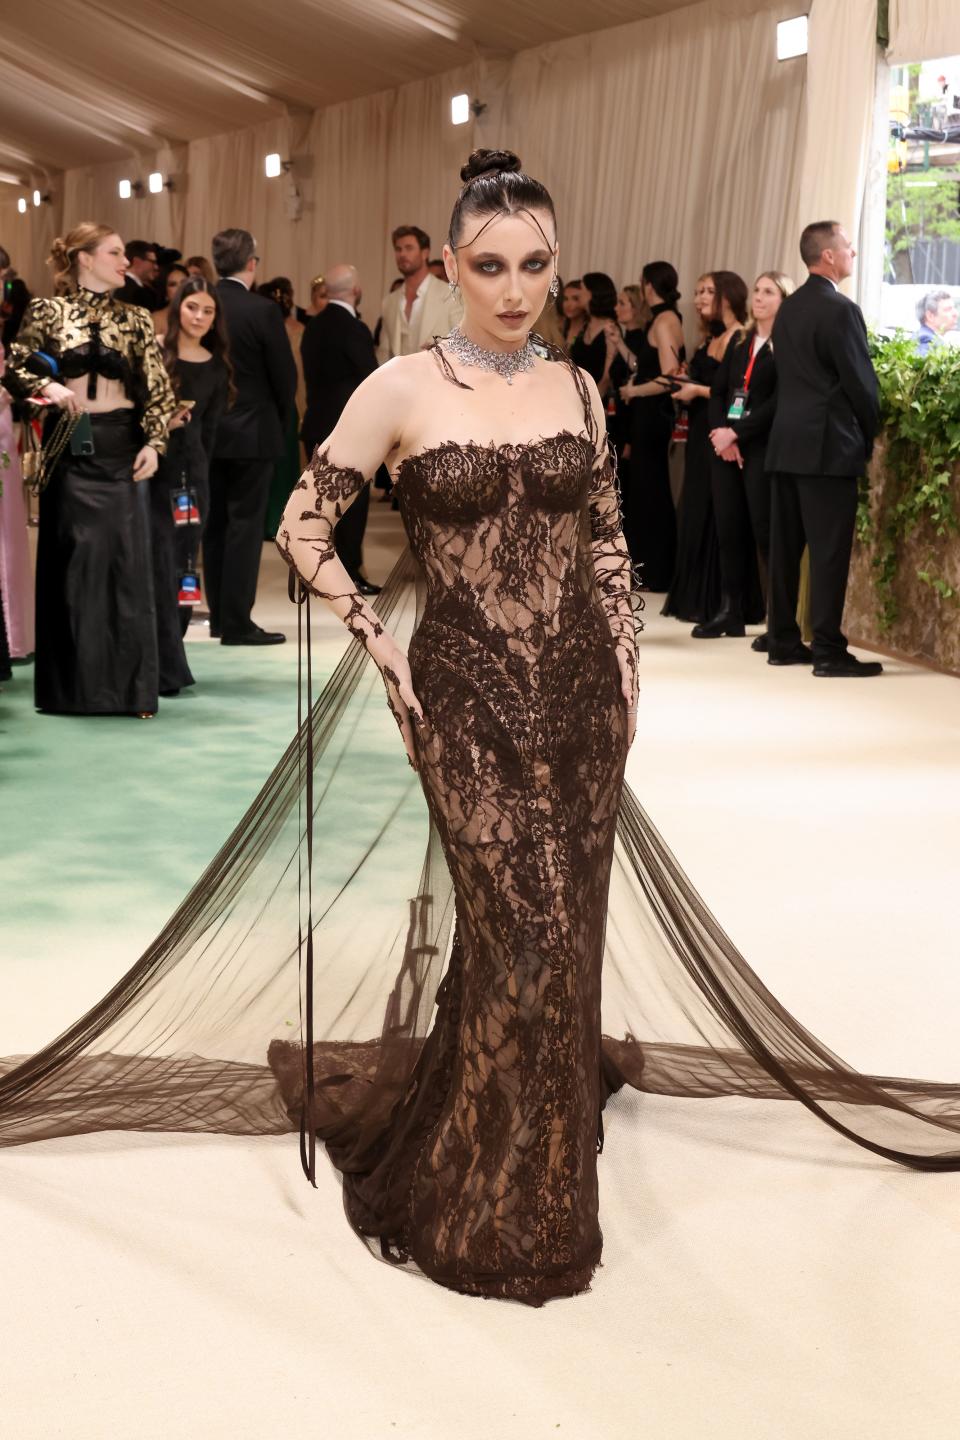 The returning host donned a Jean Paul Gaultier gown meant to represent the fragility and darkness of nature, like a garden in winter.